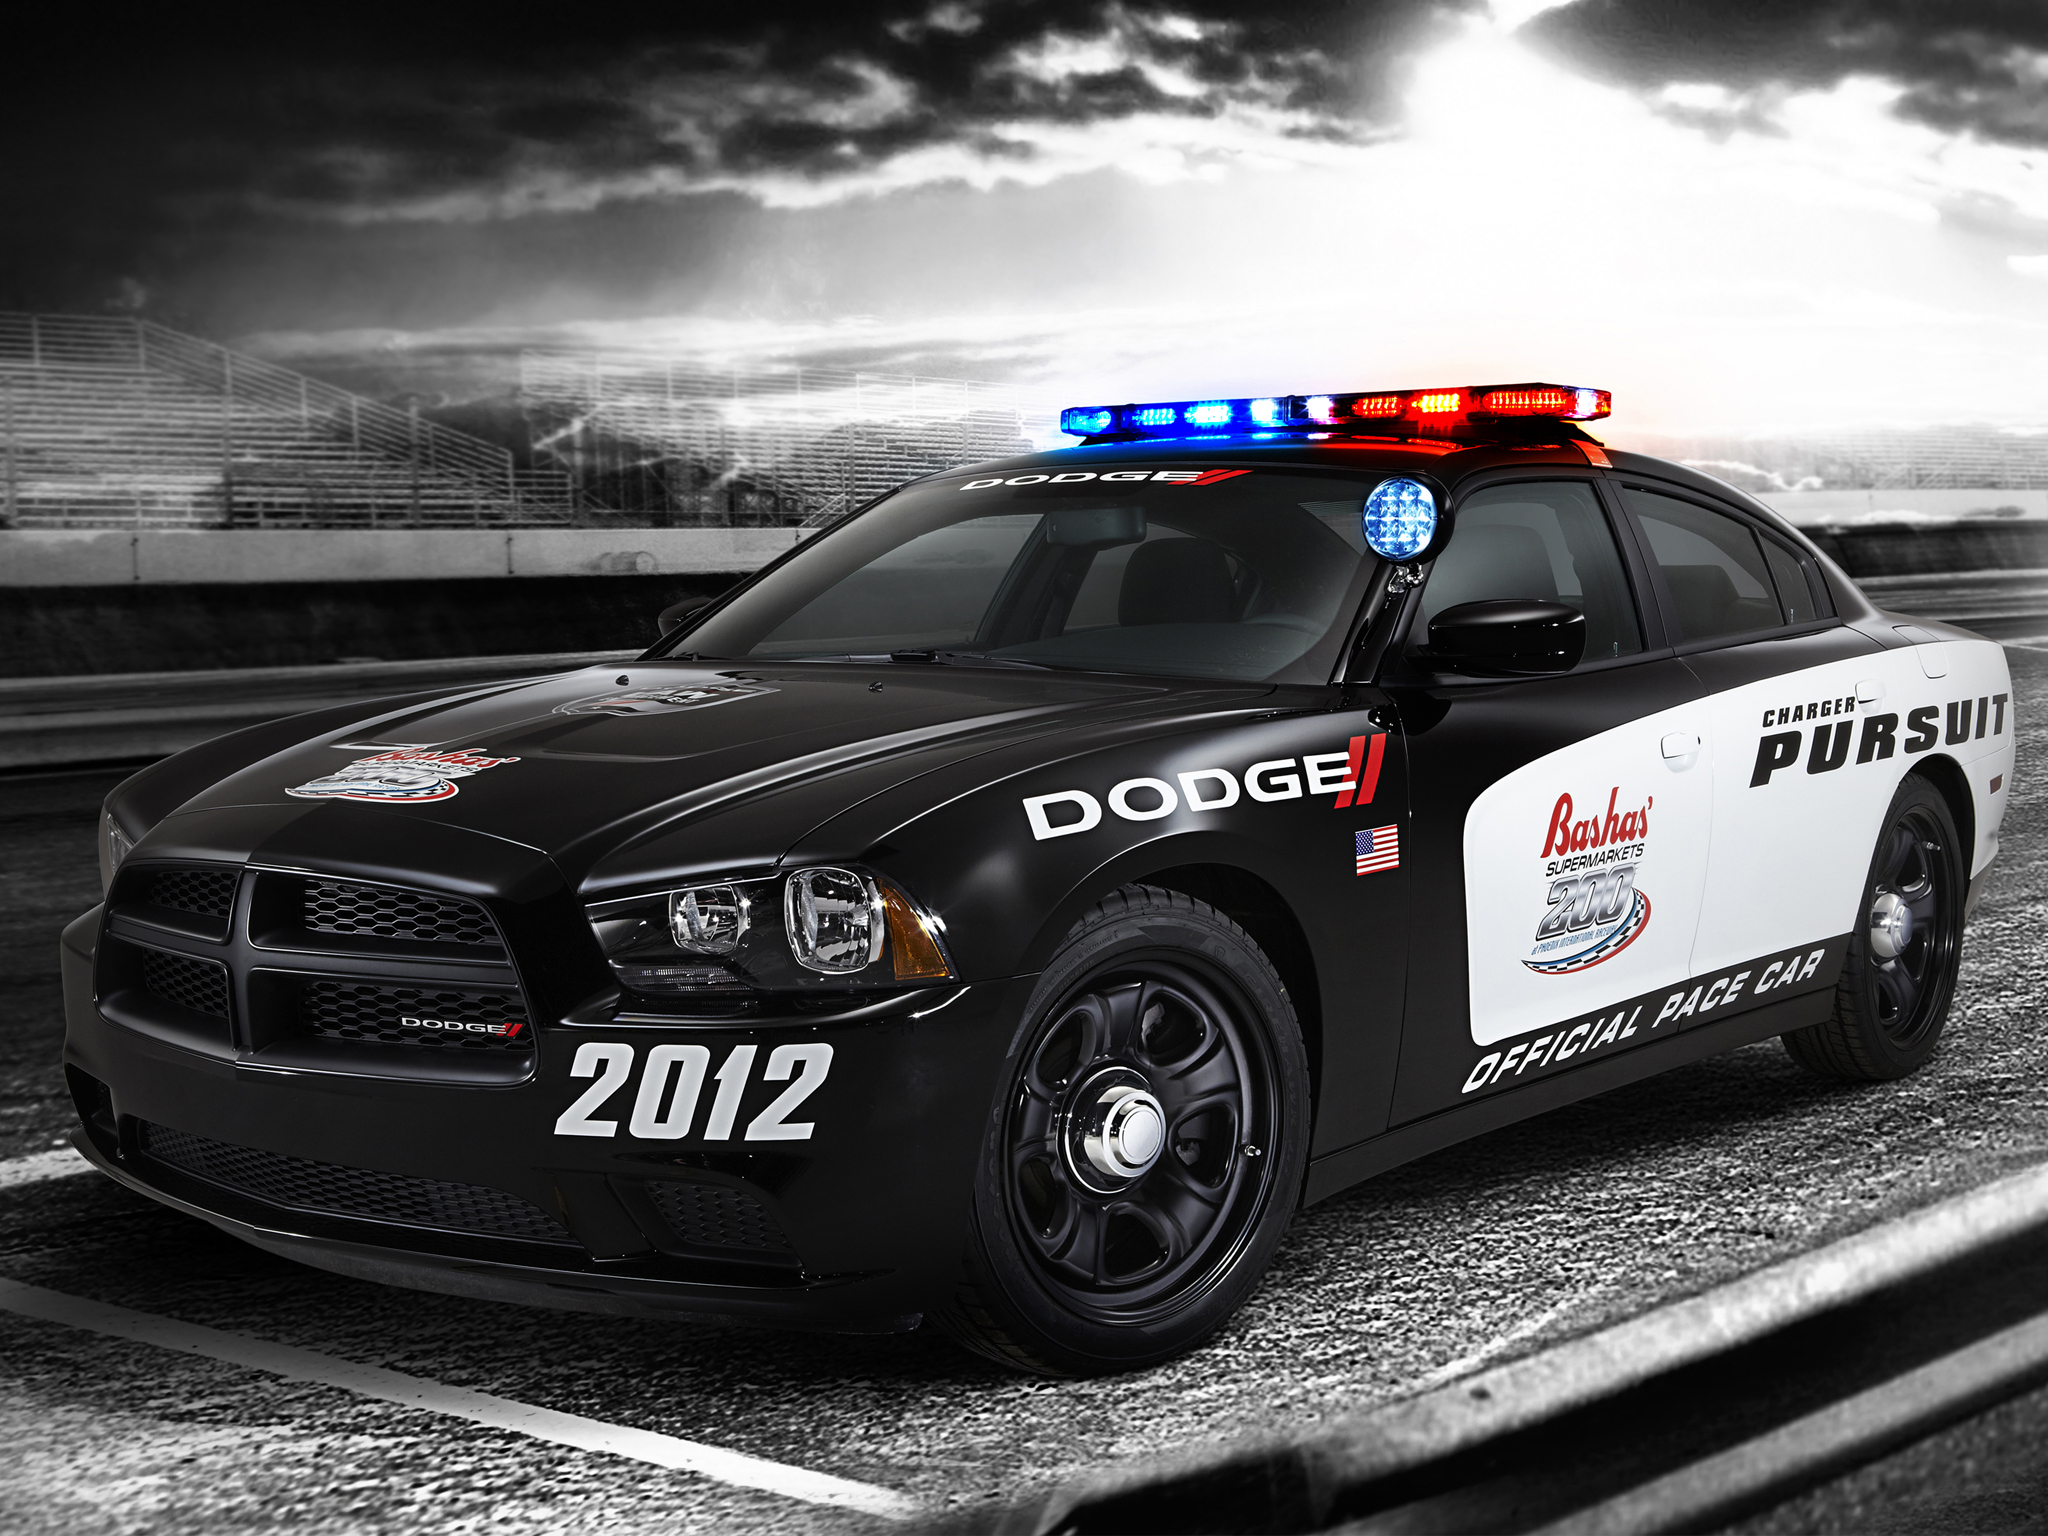 2012, Dodge, Charger, Pursuit, Pace, Nascar, Muscle, Police Wallpaper